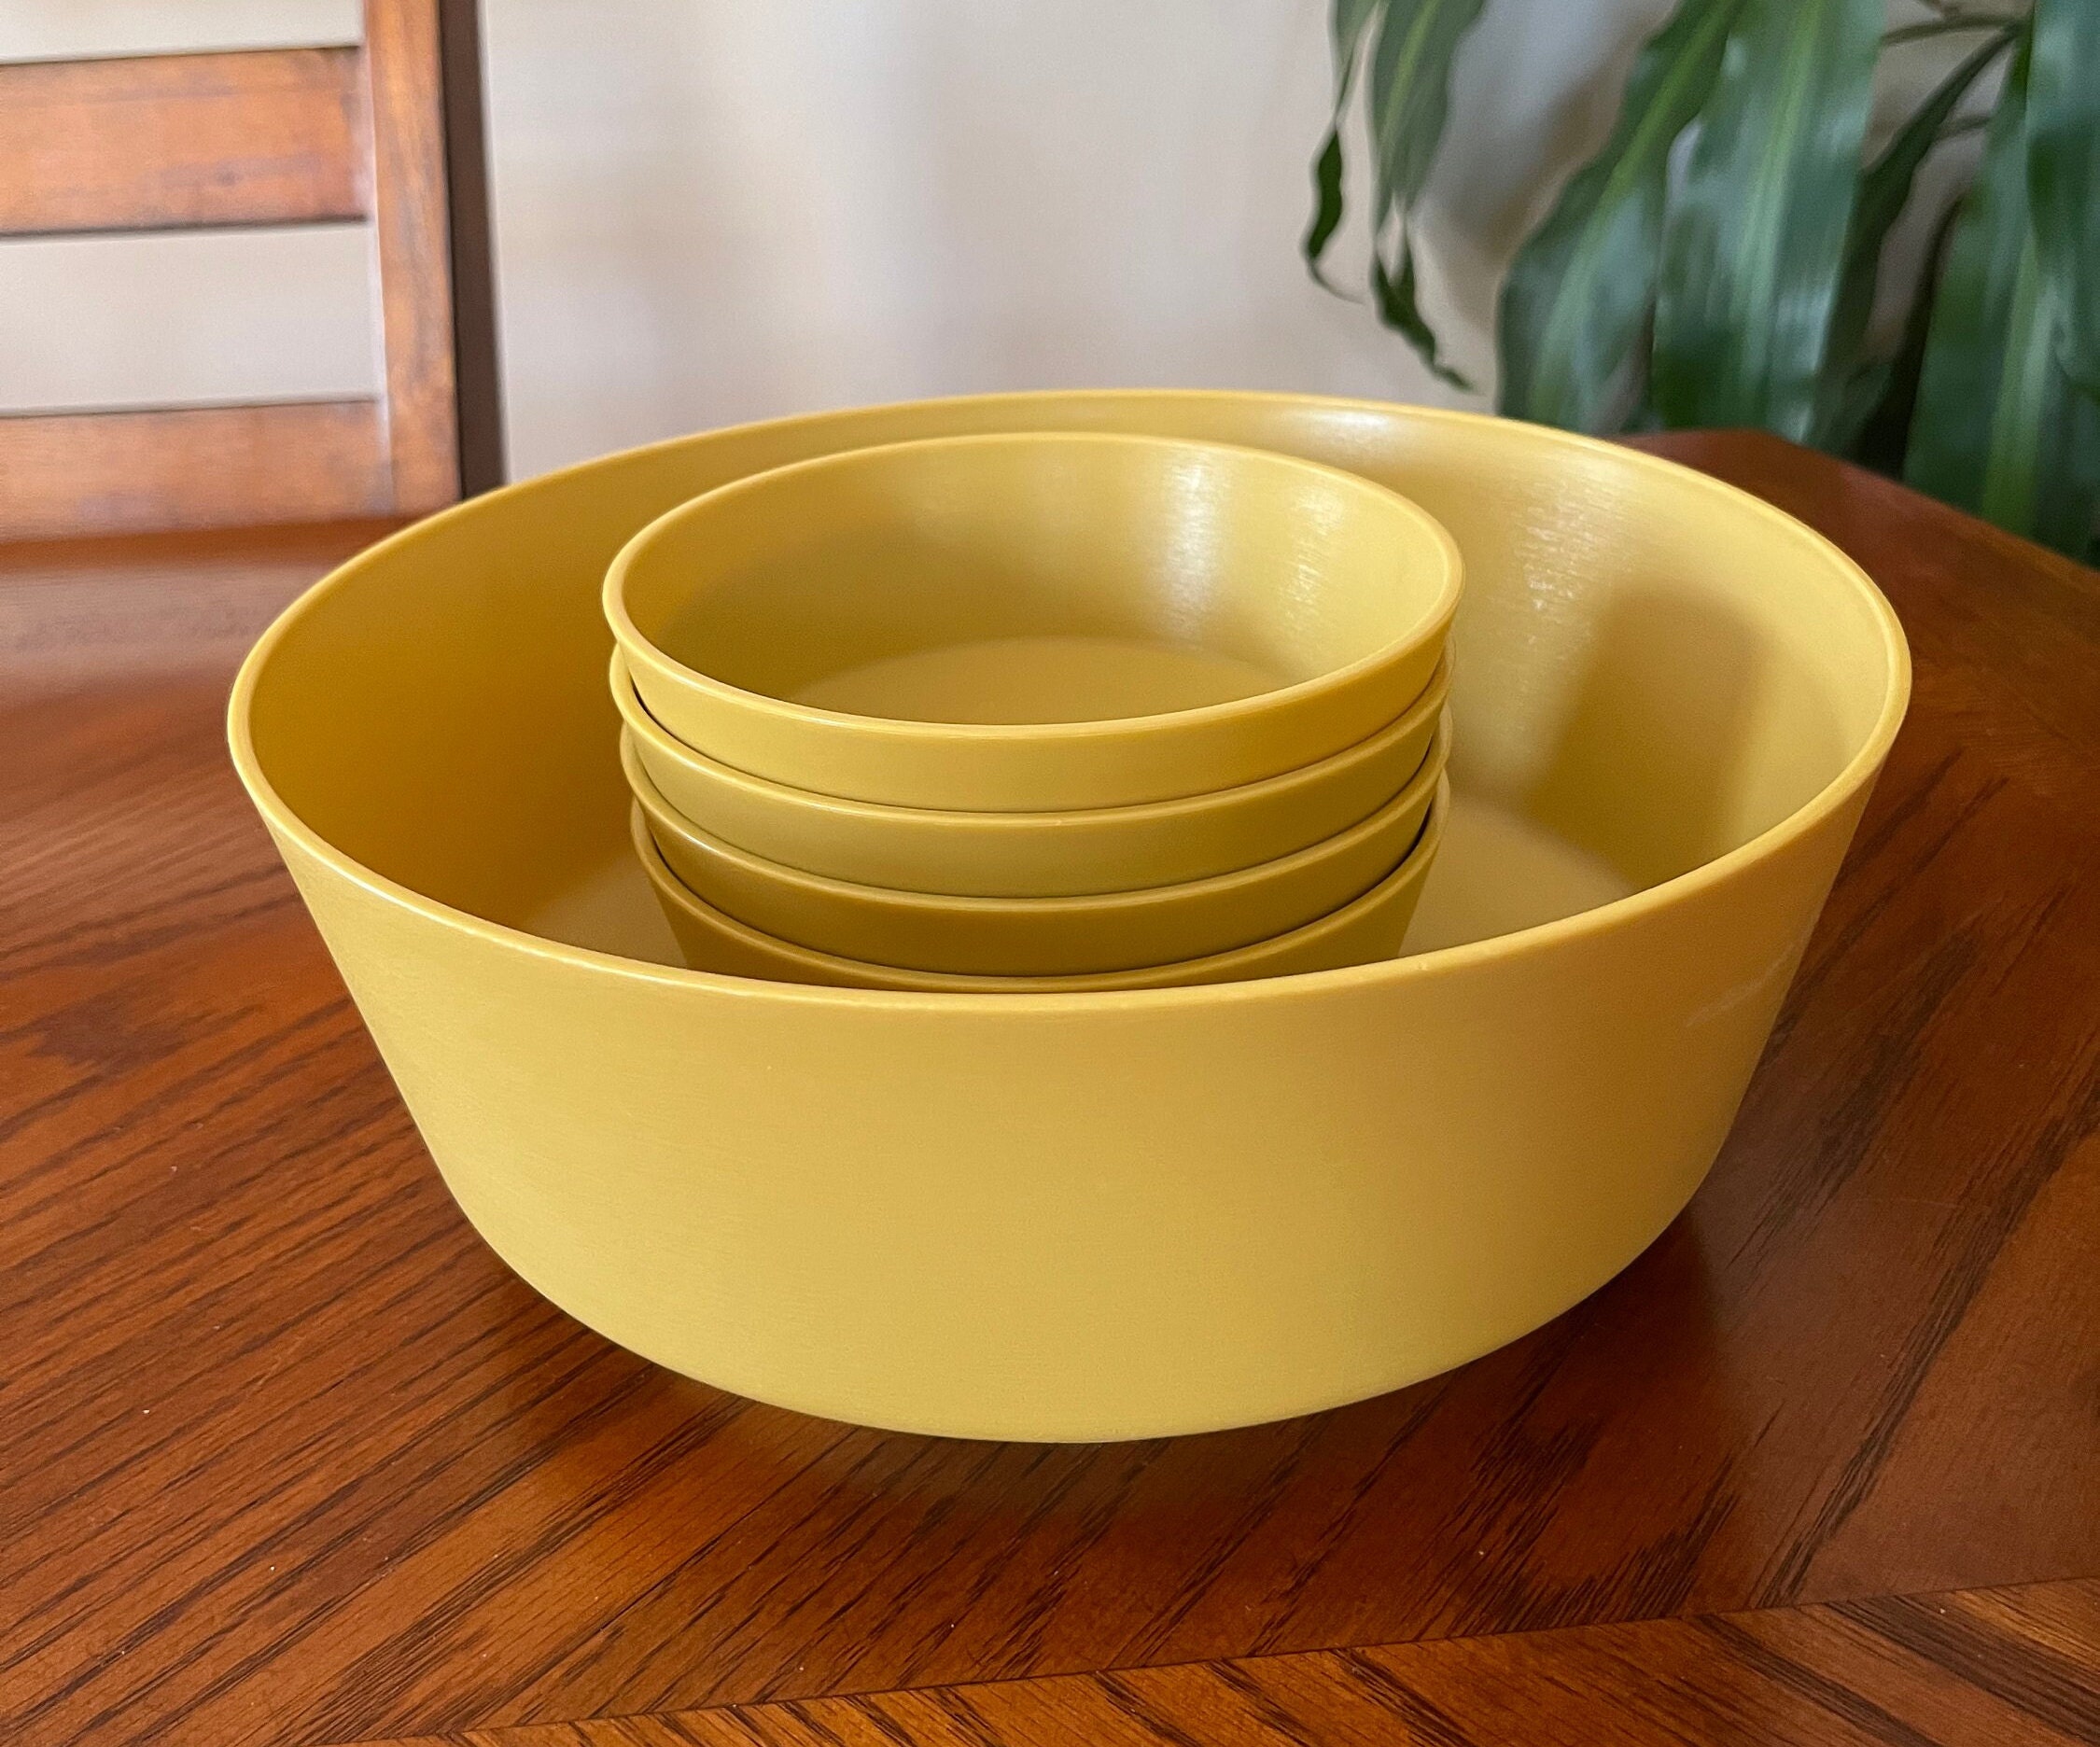 Vintage Rubbermaid Nesting Mixing Bowls Set W Lids Bowls 8 6 4 Cup in  Yellow Red & Blue 